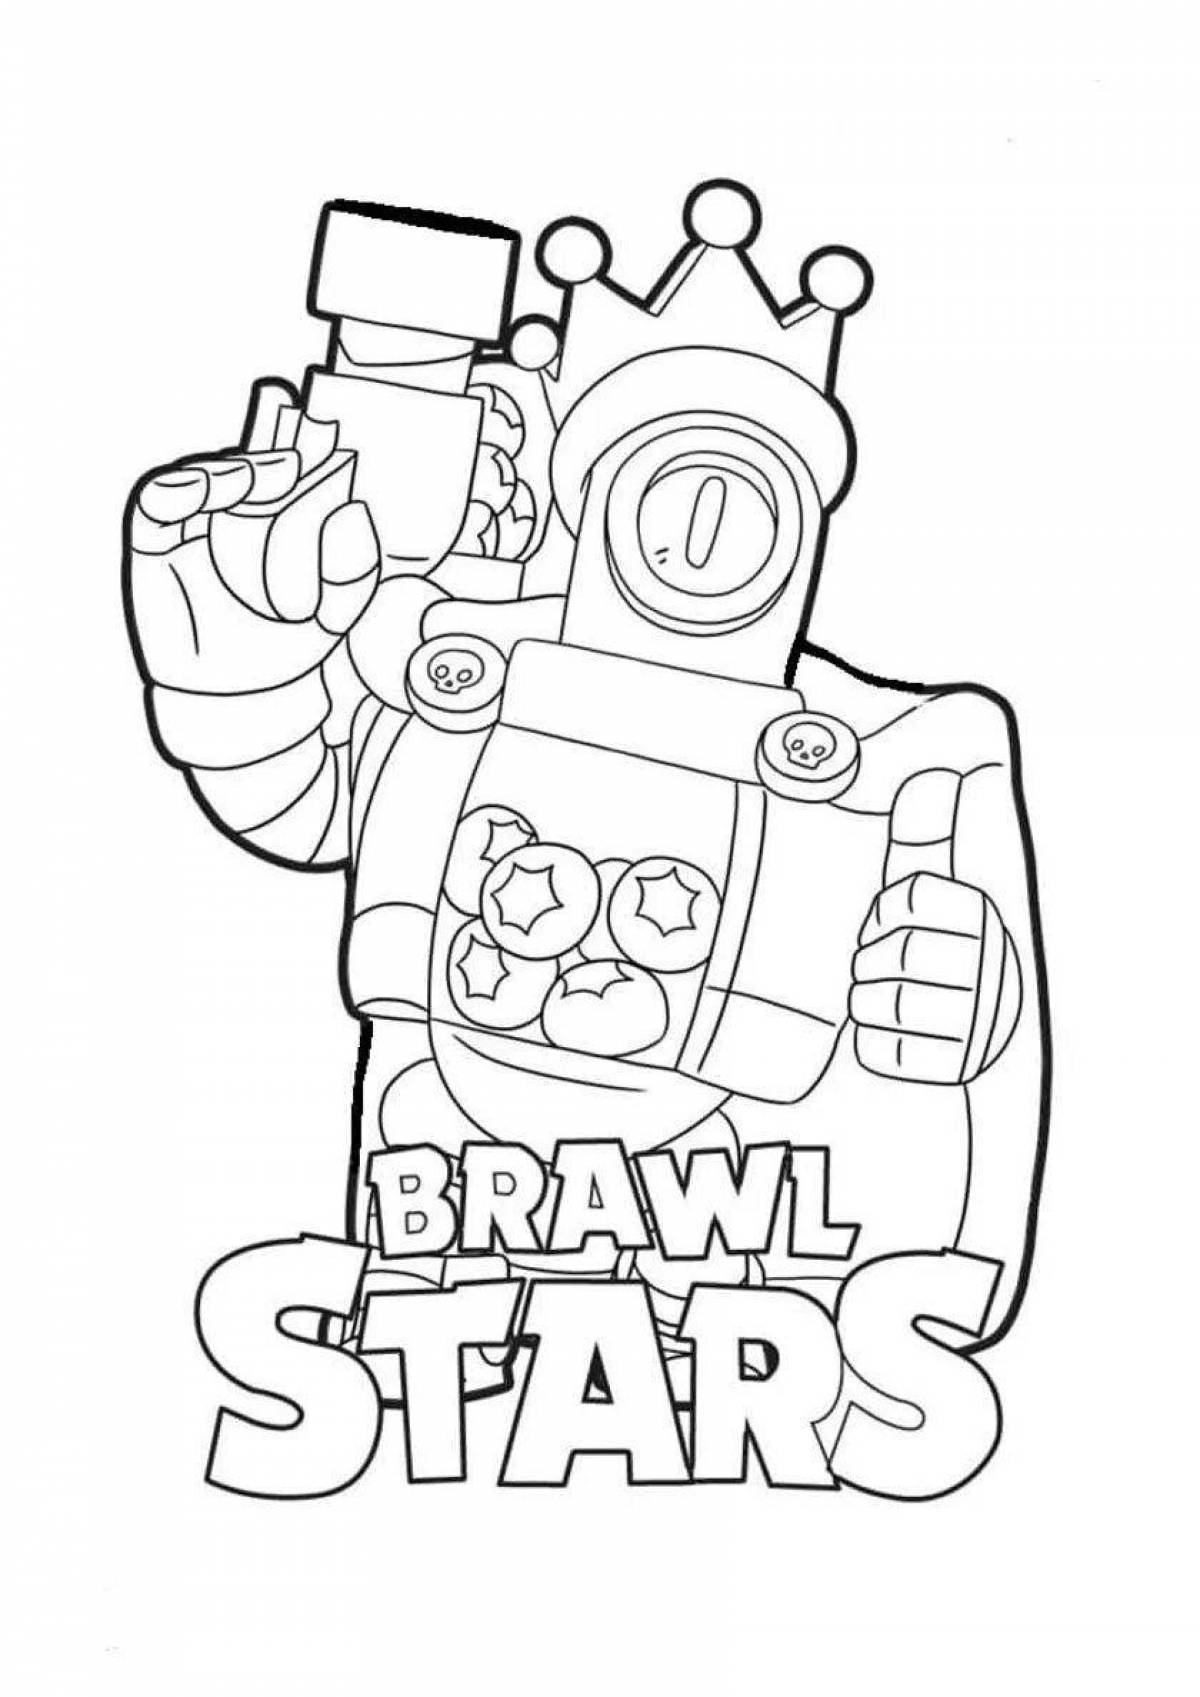 Playful coloring pins from brawl stars